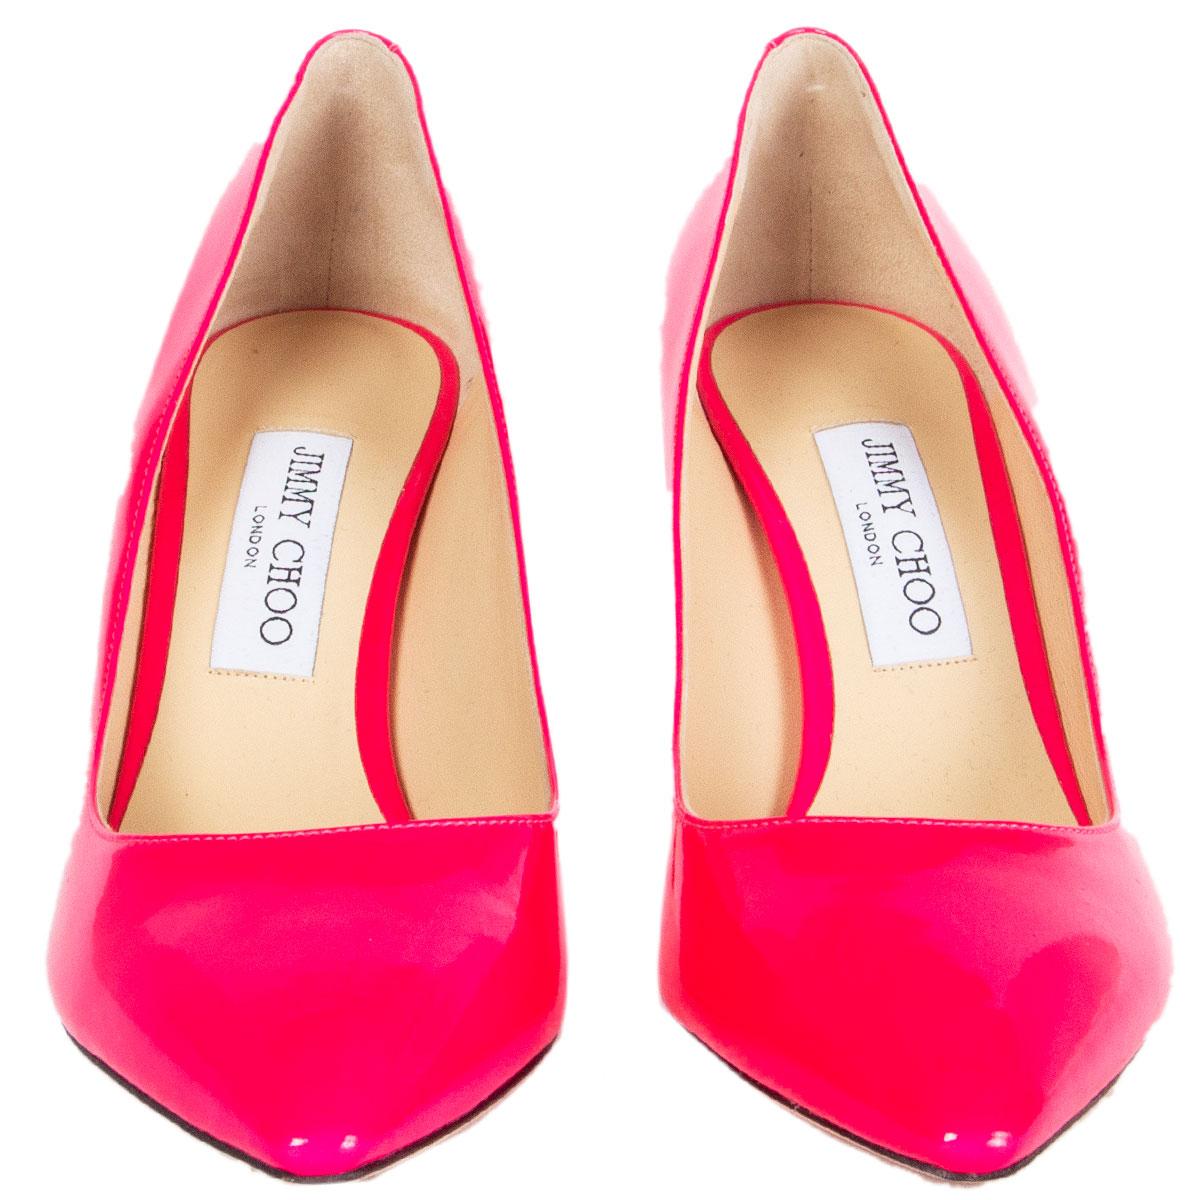 100% authentic Jimmy Choo Romy 85 pointed toe pumps in pink patent leather. Brand new. 

Imprinted Size	39.5
Shoe Size	39.5
Inside Sole	26.5cm (10.3in)
Width	7.5cm (2.9in)
Heel	8.5cm (3.3in)

All our listings include only the listed item unless